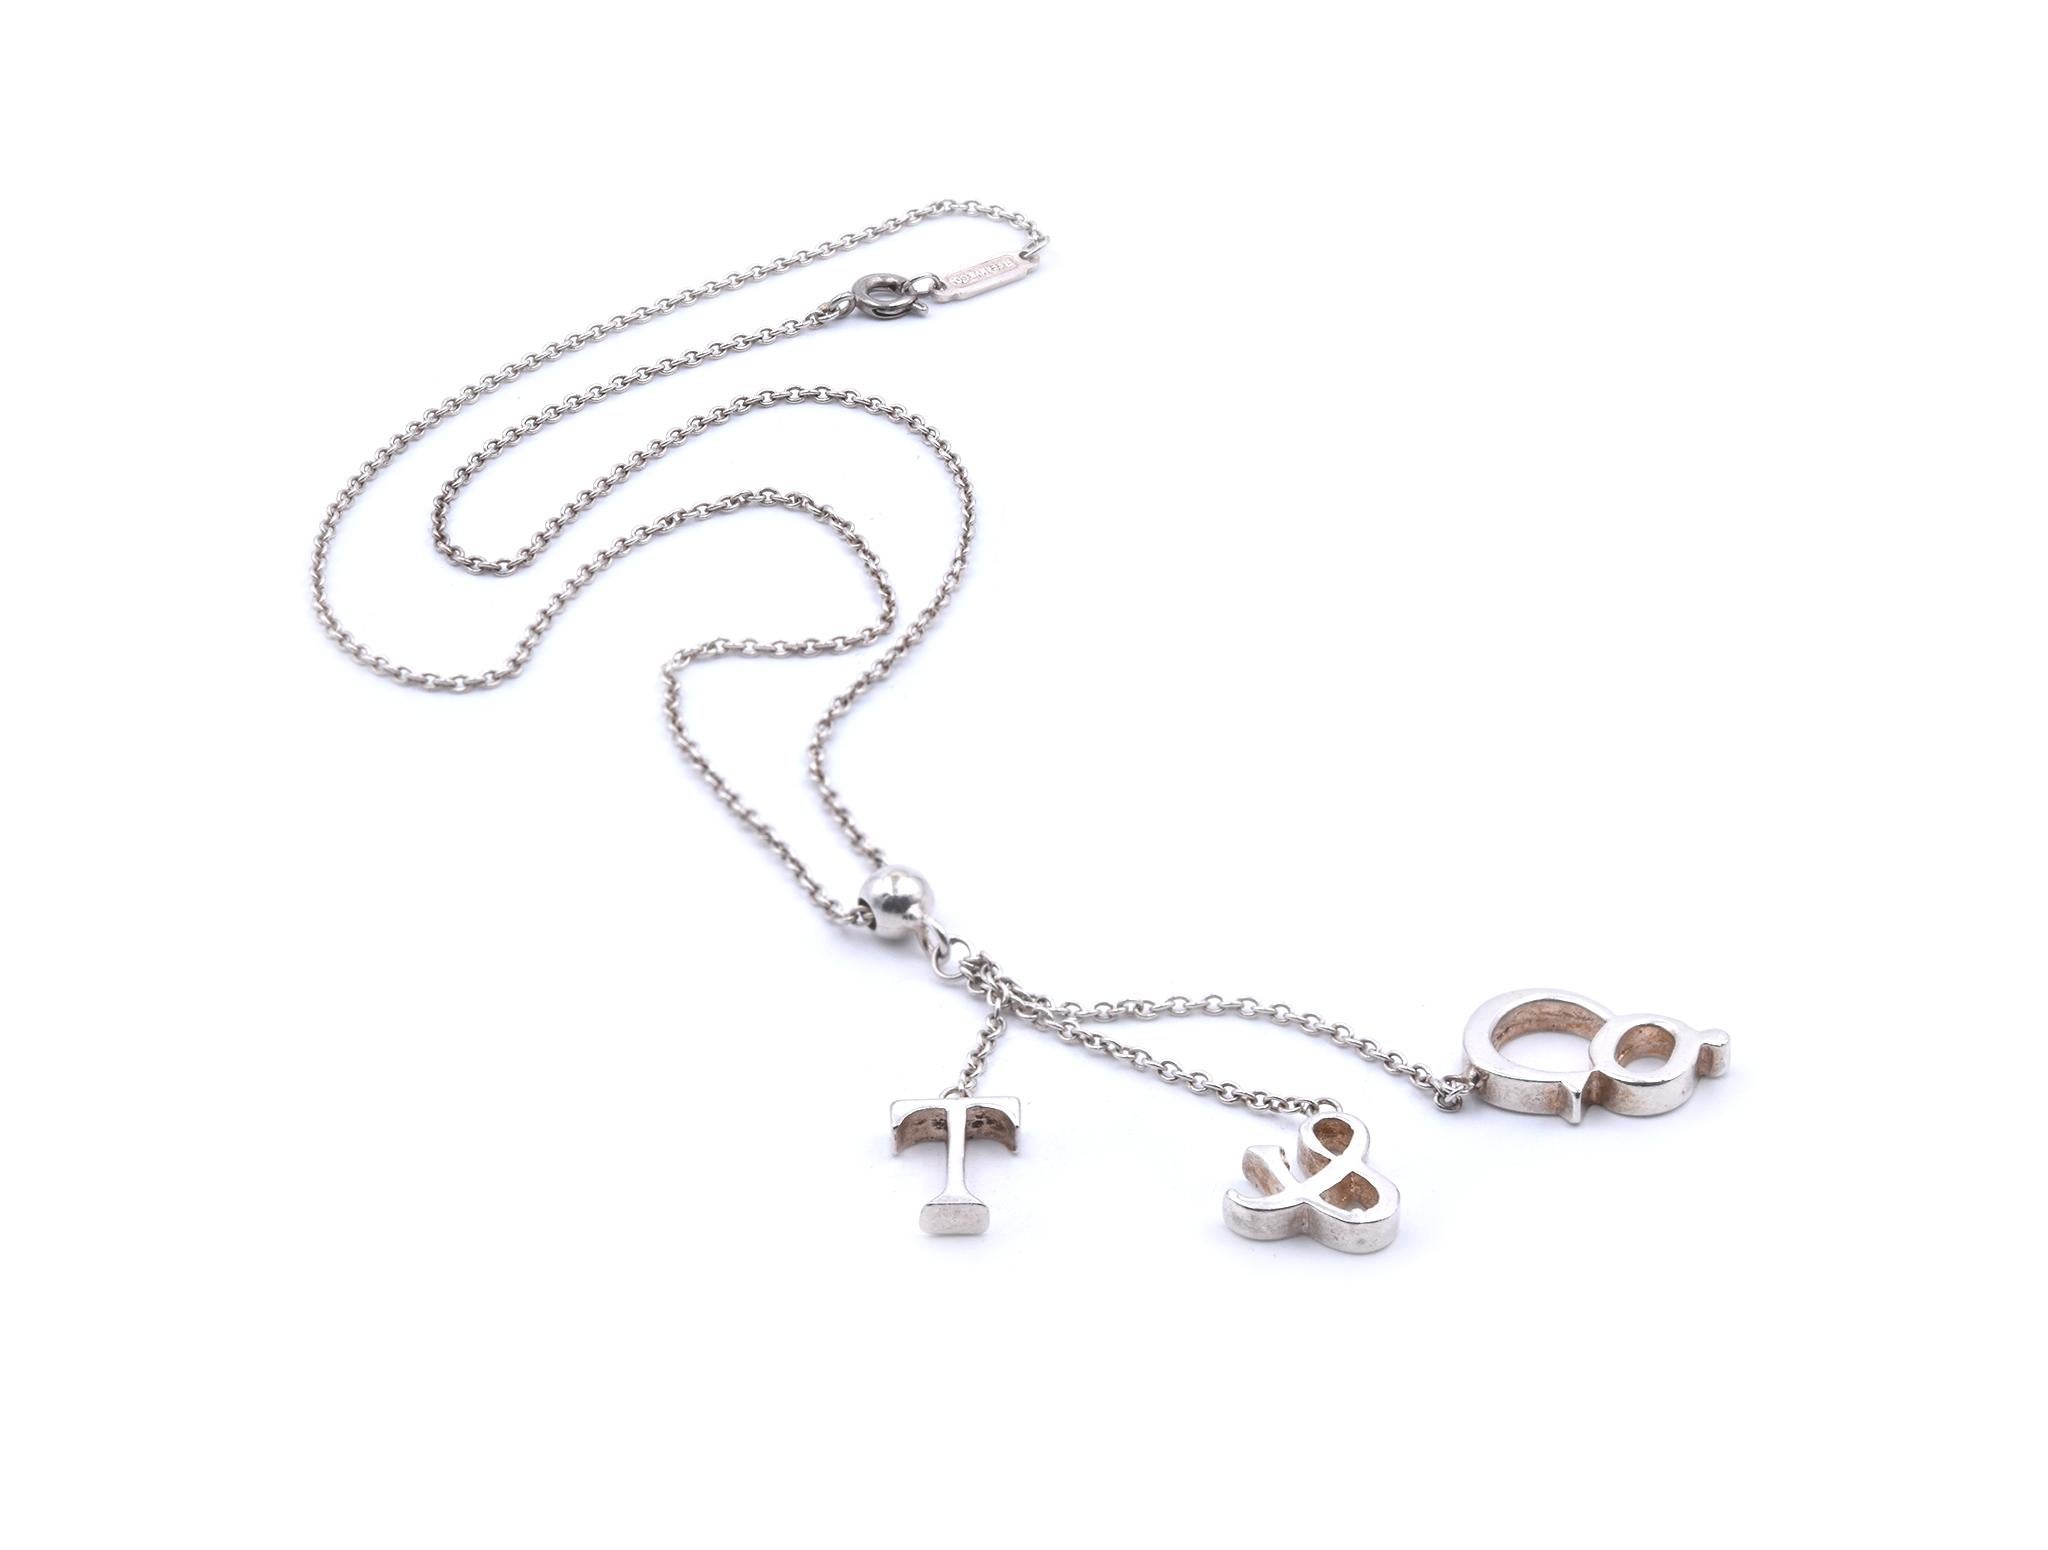 Designer: Tiffany & Co.
Material: sterling silver
Dimensions: necklace measures 17-inches in length
Weight: 5.9 grams